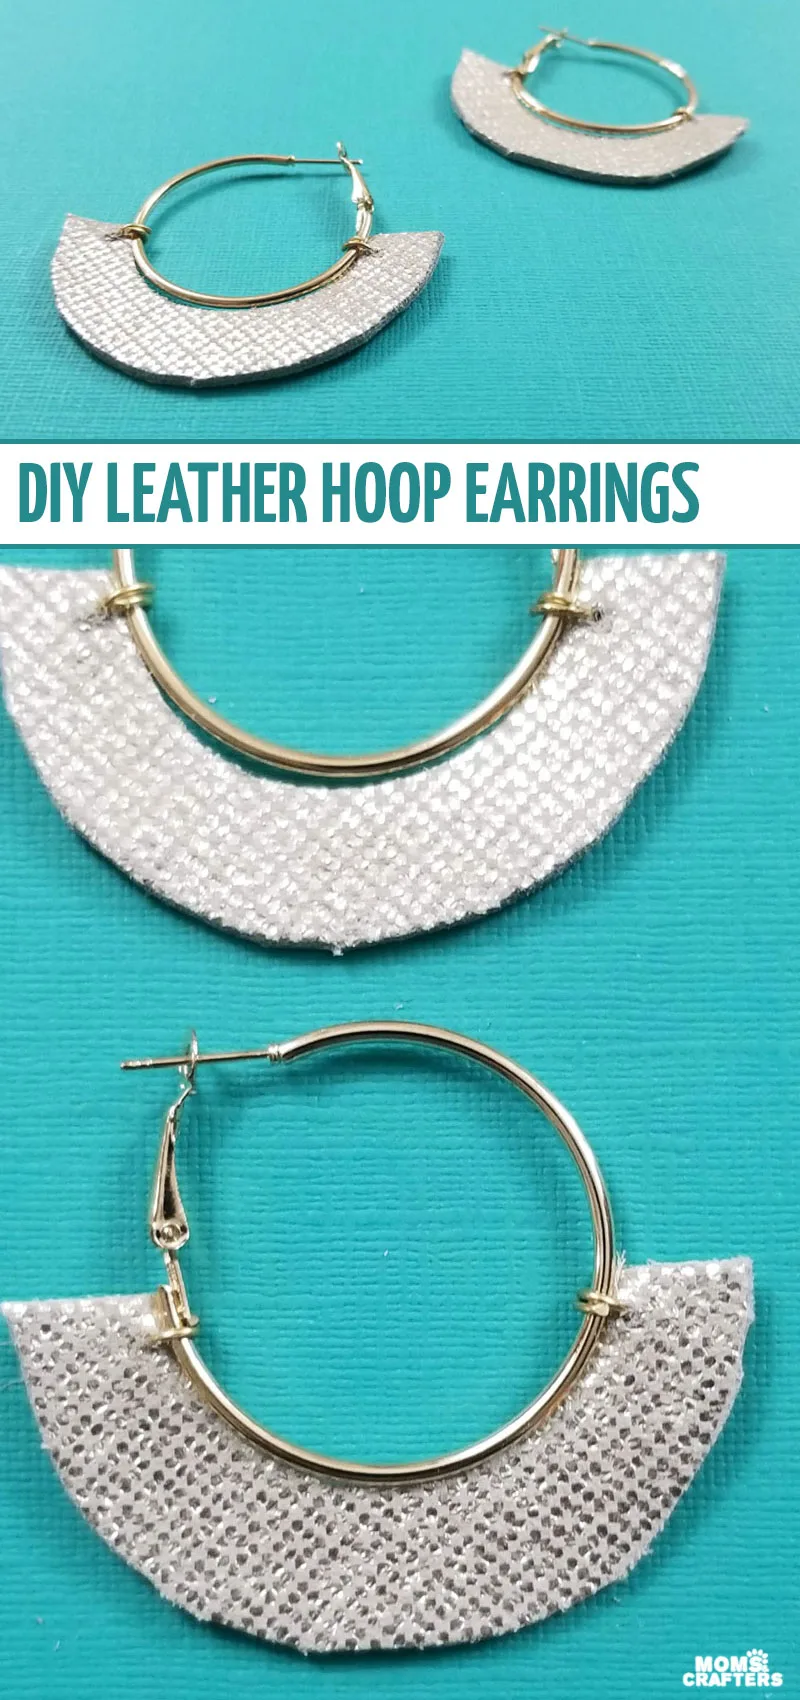 Make some cool leather hoop earrings - a fun and easy jewelry making project for beginners!